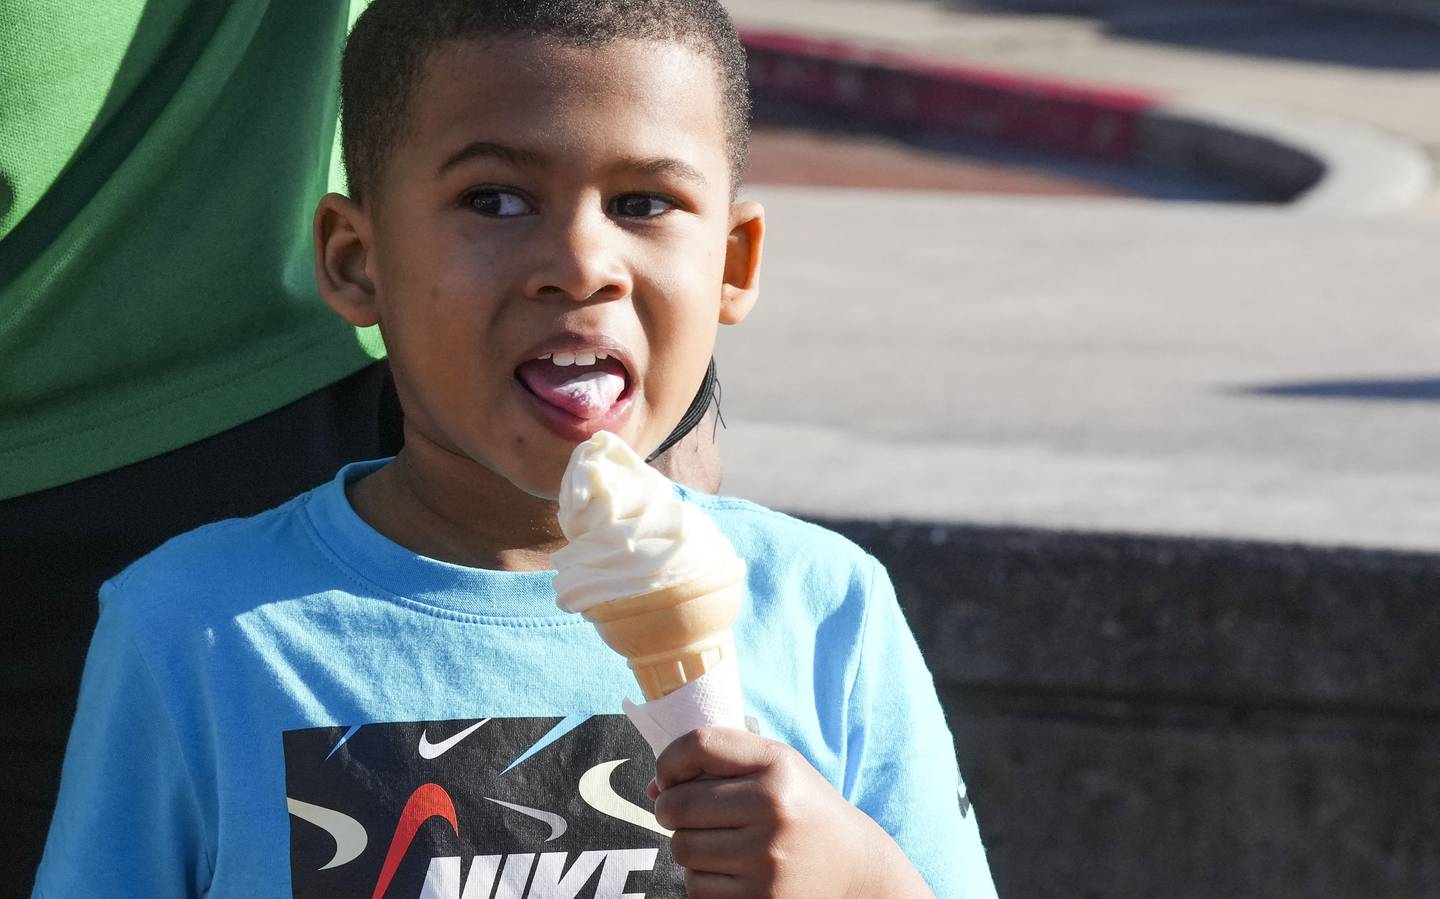 Jordan Freeman, 4, licks an ice cream cone while out on a walk with his family to enjoy the nice weather.